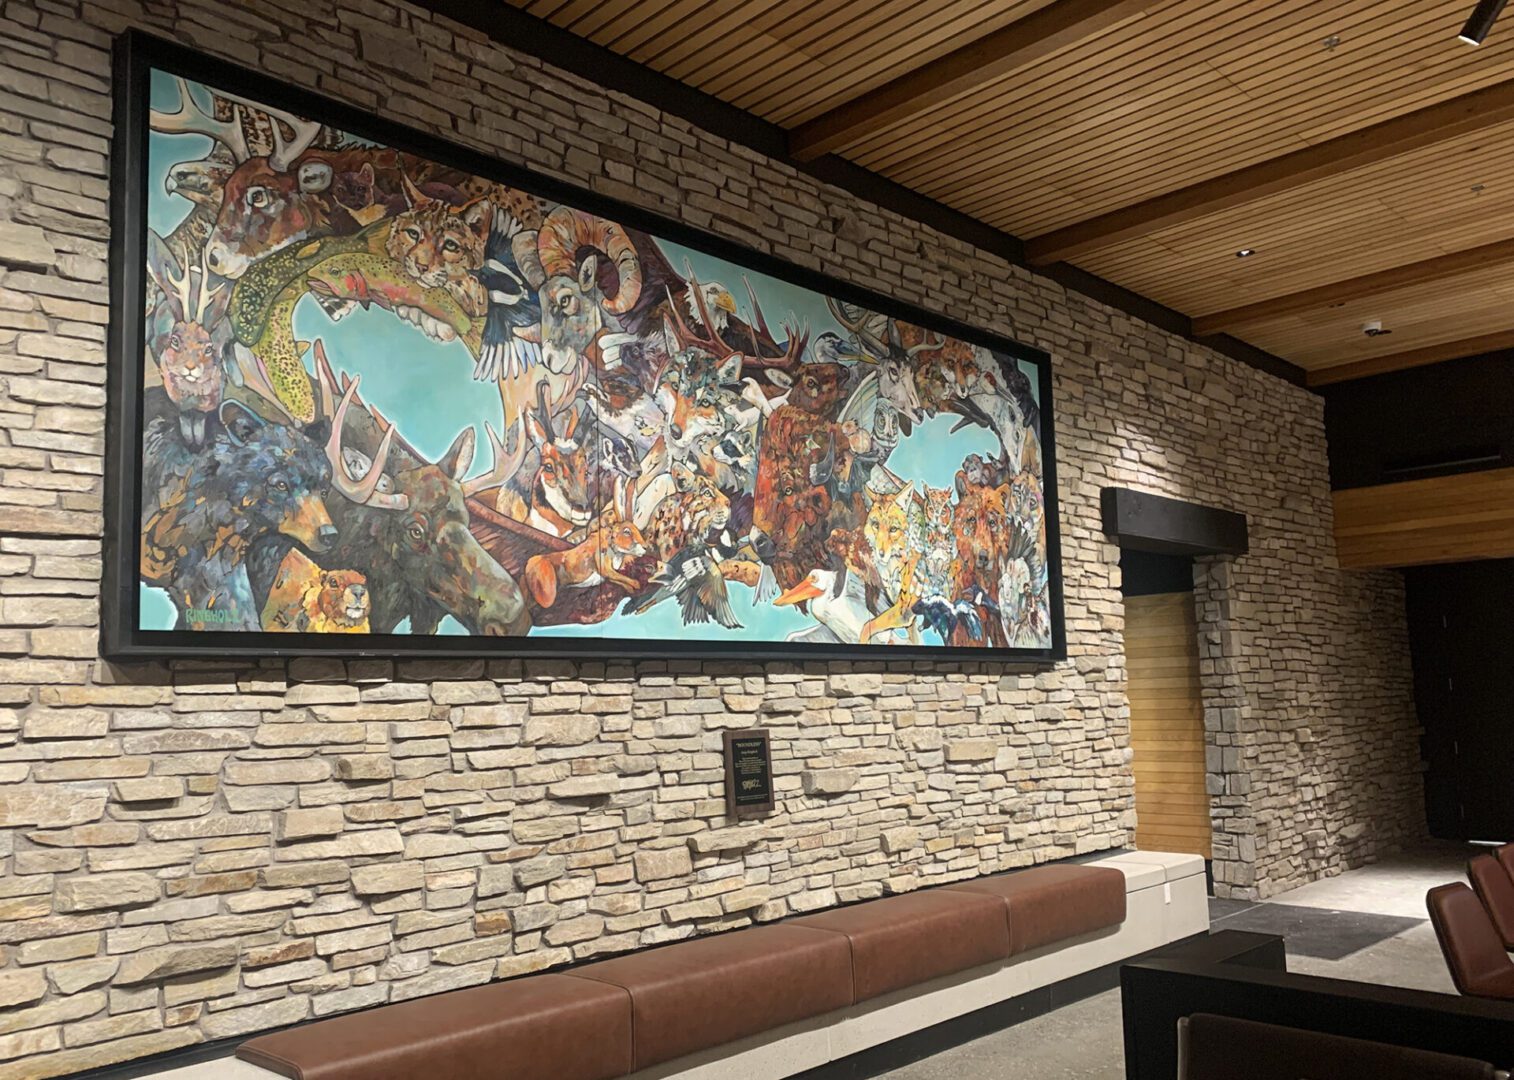 A large painting hangs on the wall of a waiting room.